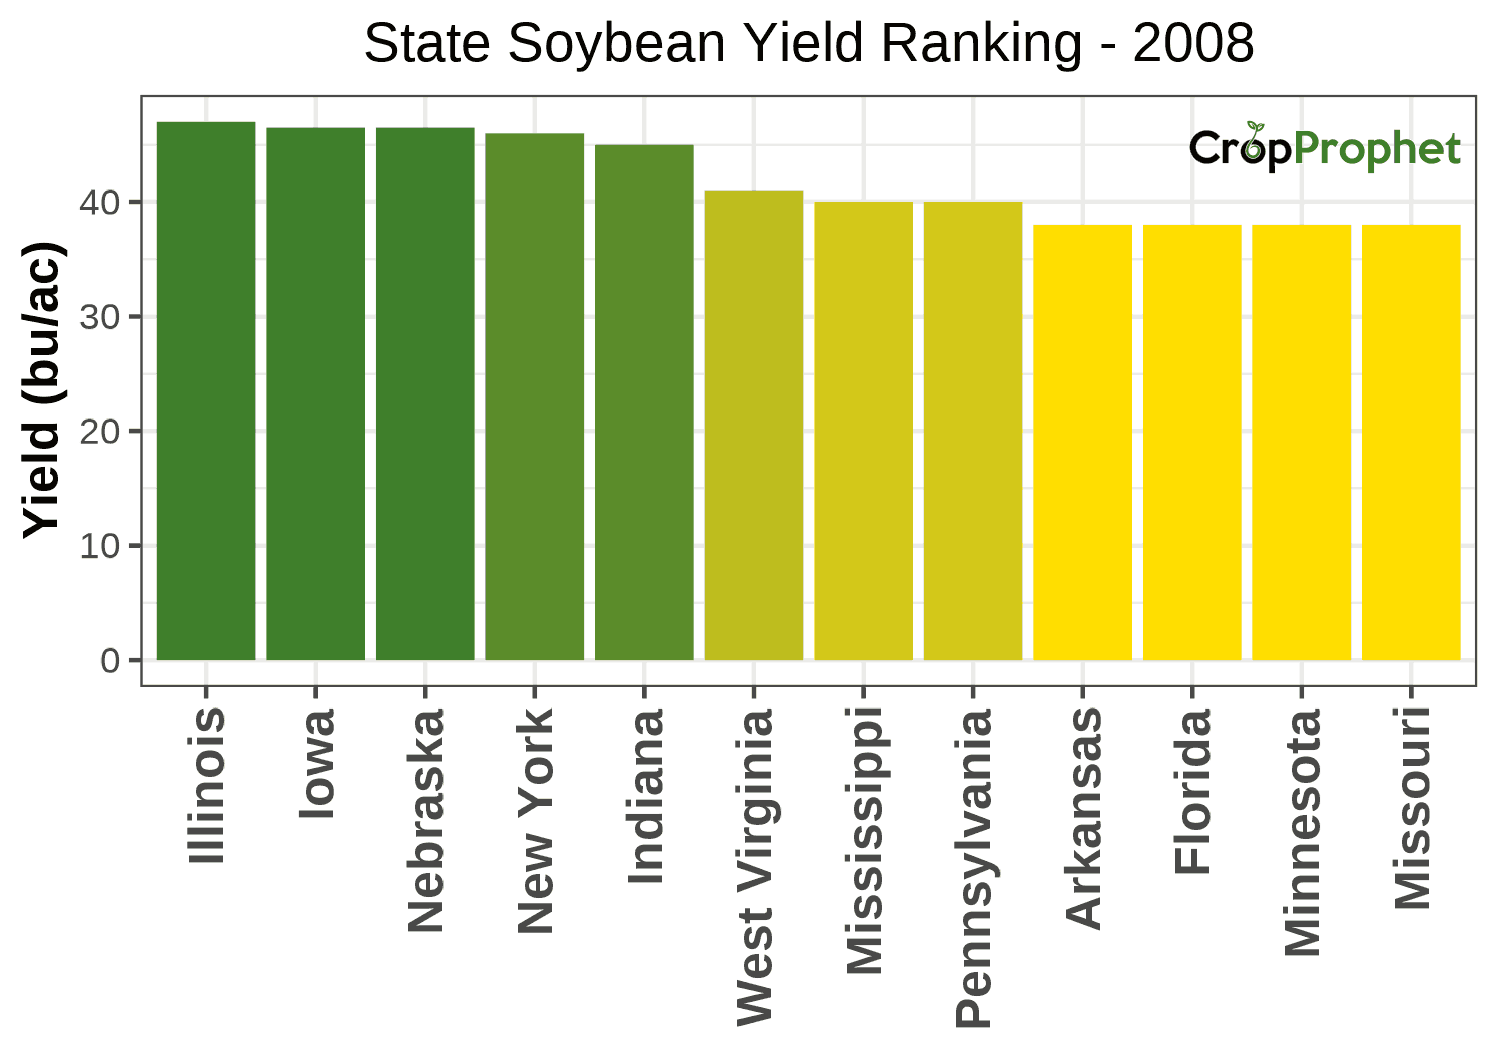 Soybean Production by State - 2008 Rankings